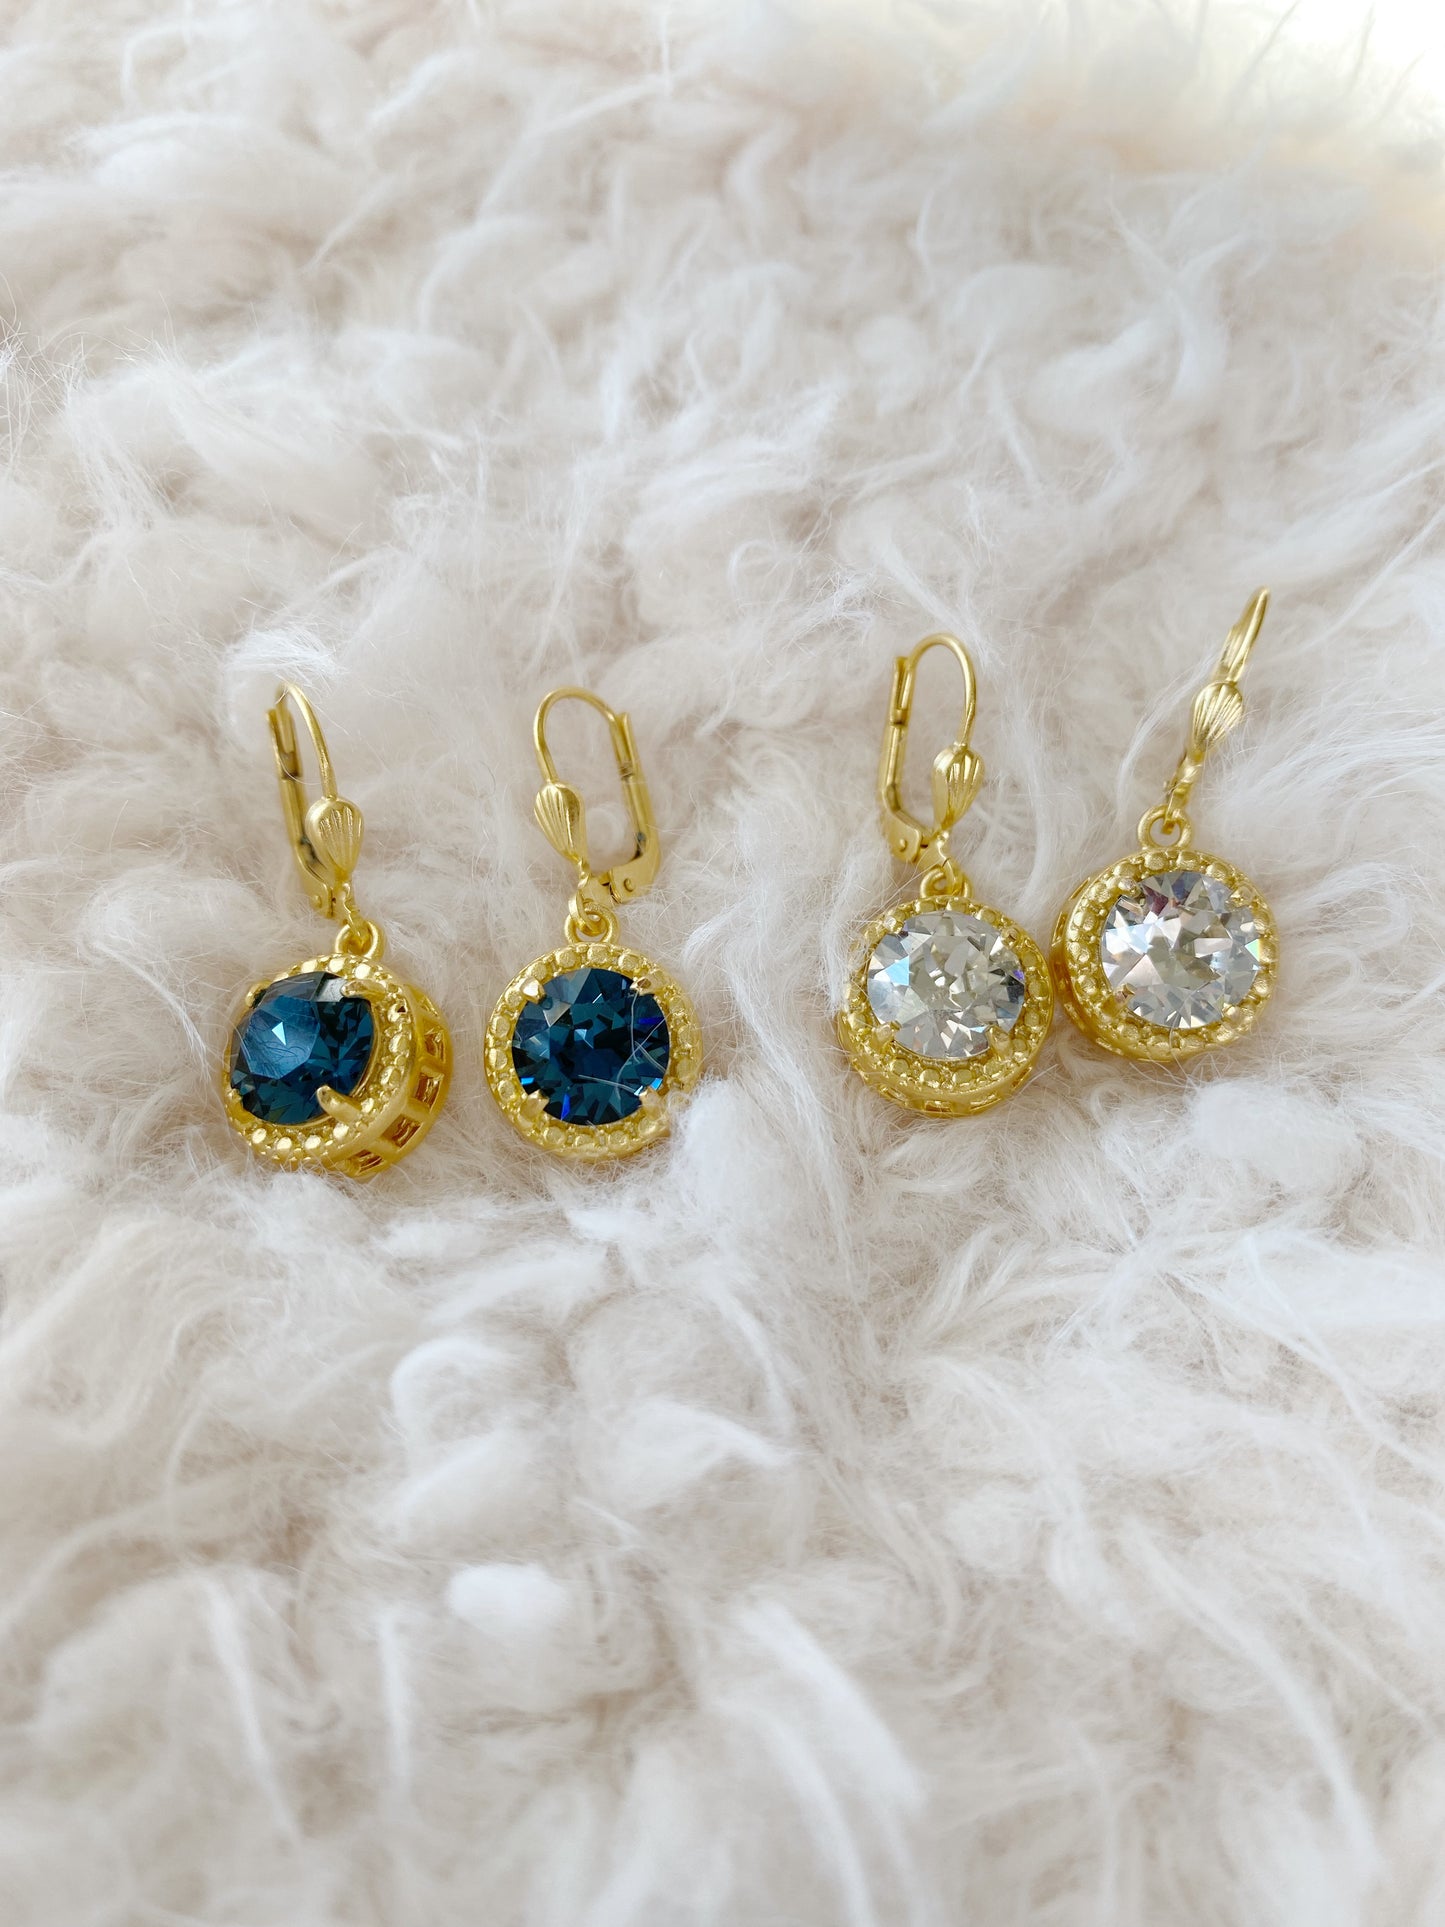 Round Crystal Earring